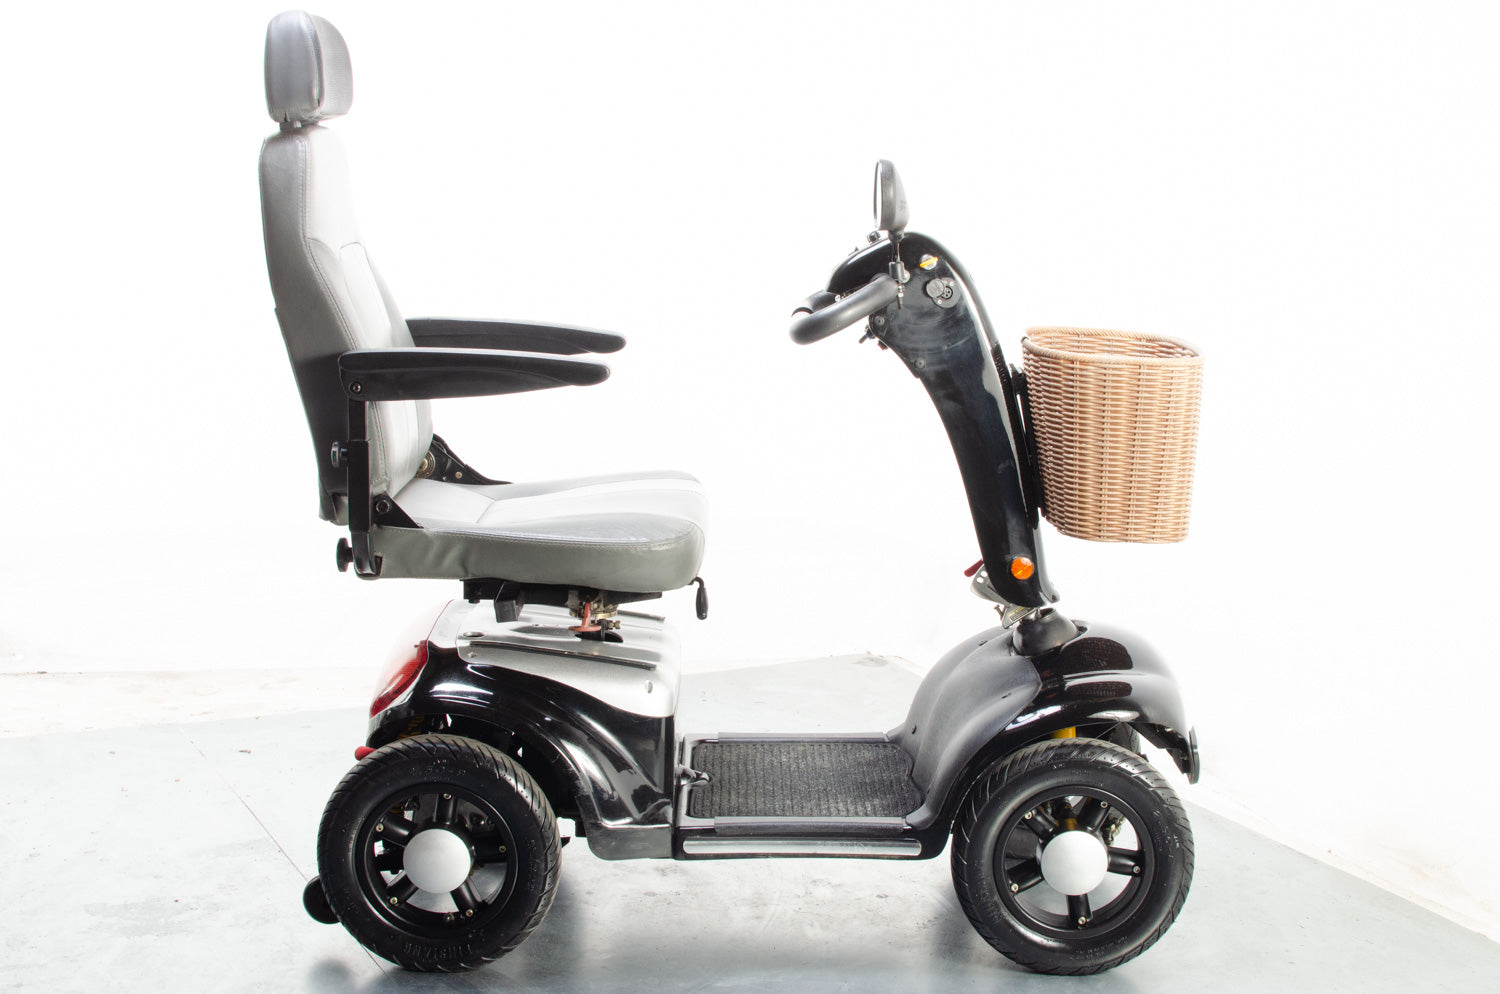 2012 Sterling Diamond 8mph Large Road Legal Mobility Scooter from Sunrise Medical